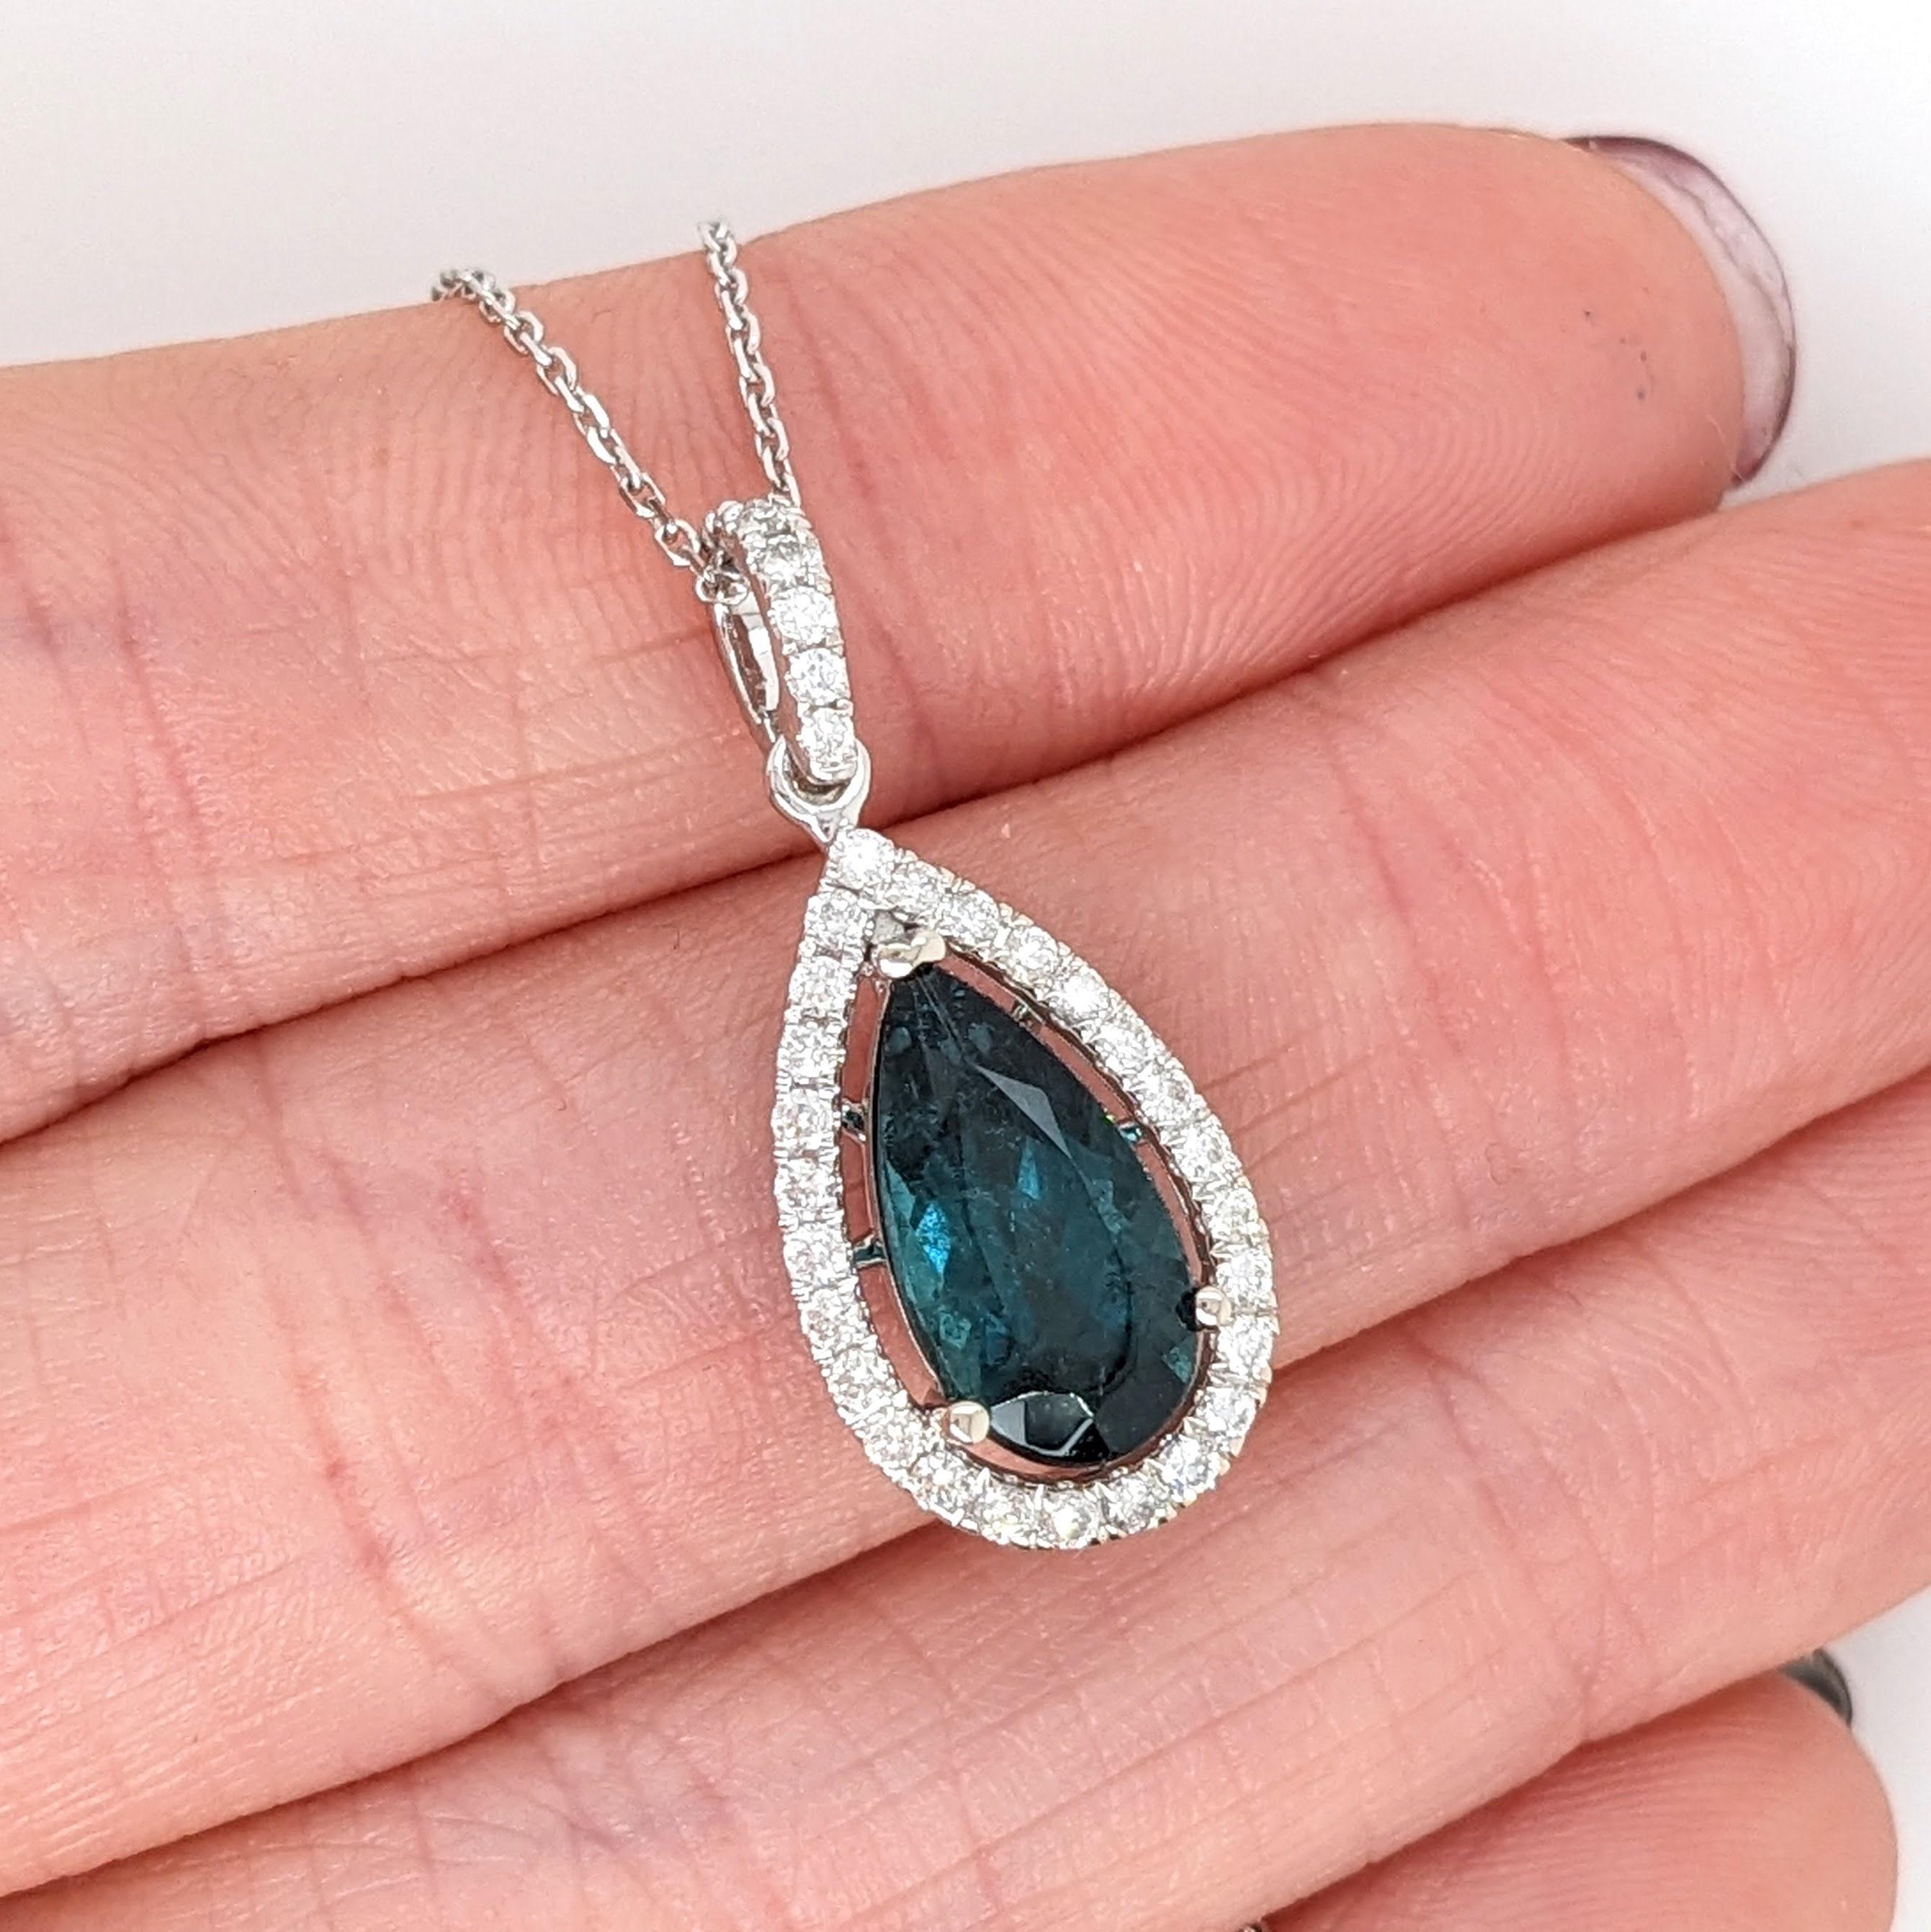 Stunning blue green Indicolite tourmaline Pendant in 14K white gold set with a beautiful natural earth mined diamond halo. Perfect for May birthstone and any special occasion! 

Specifications

Item Type: Pendant
Center Stone: Indicolite